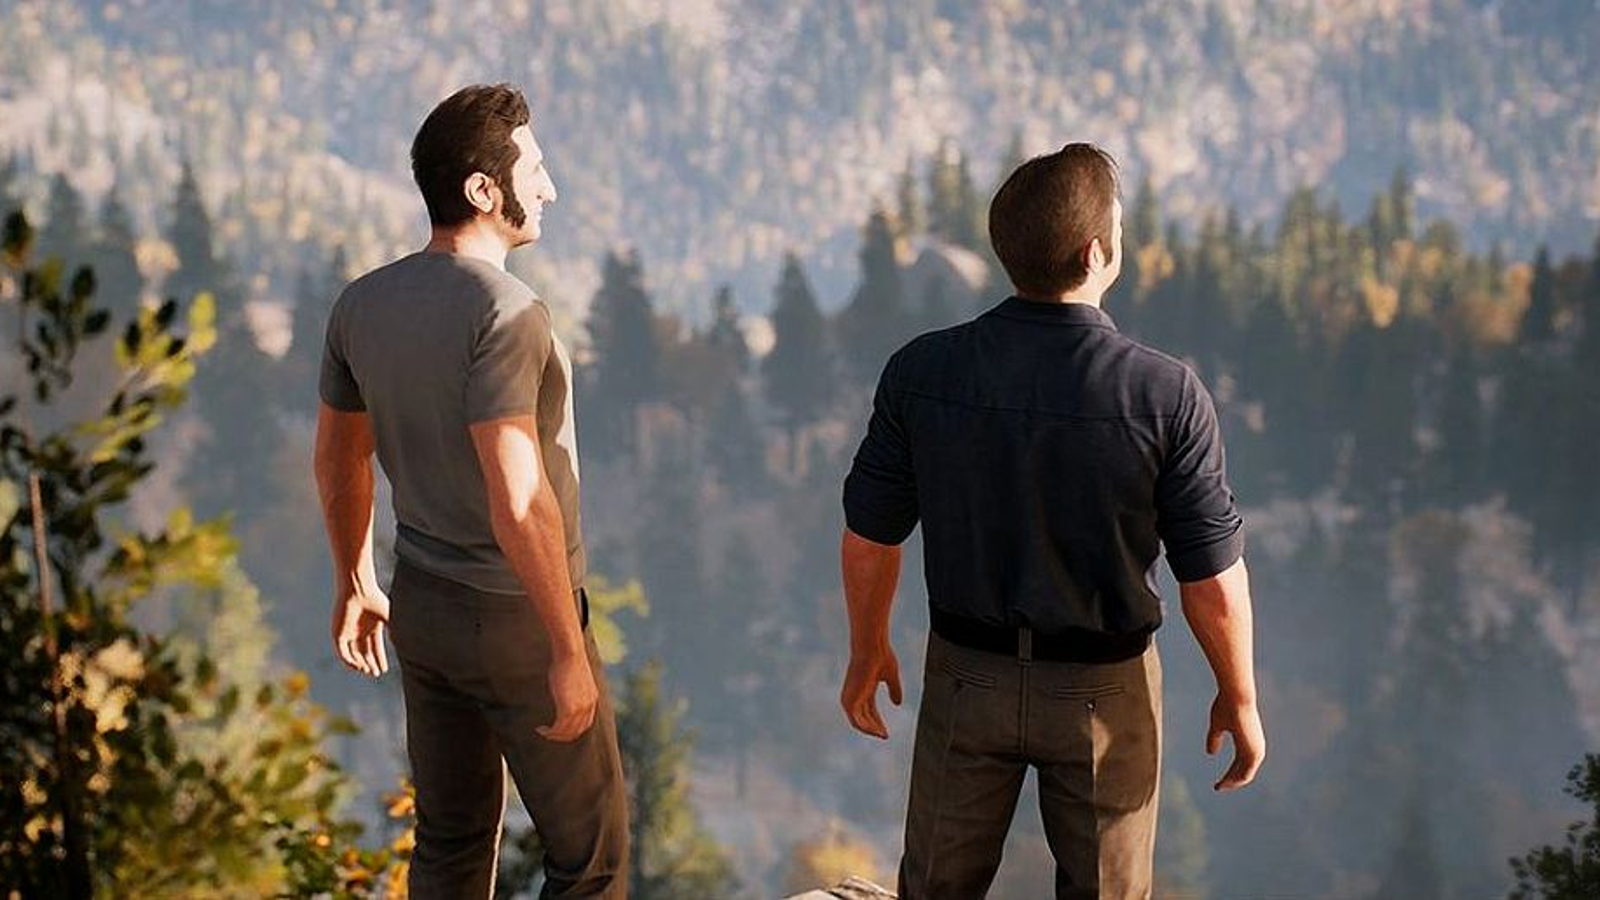 Ap away. A way out Винсент. Way out игра. A way out Лео. A way out (2018).